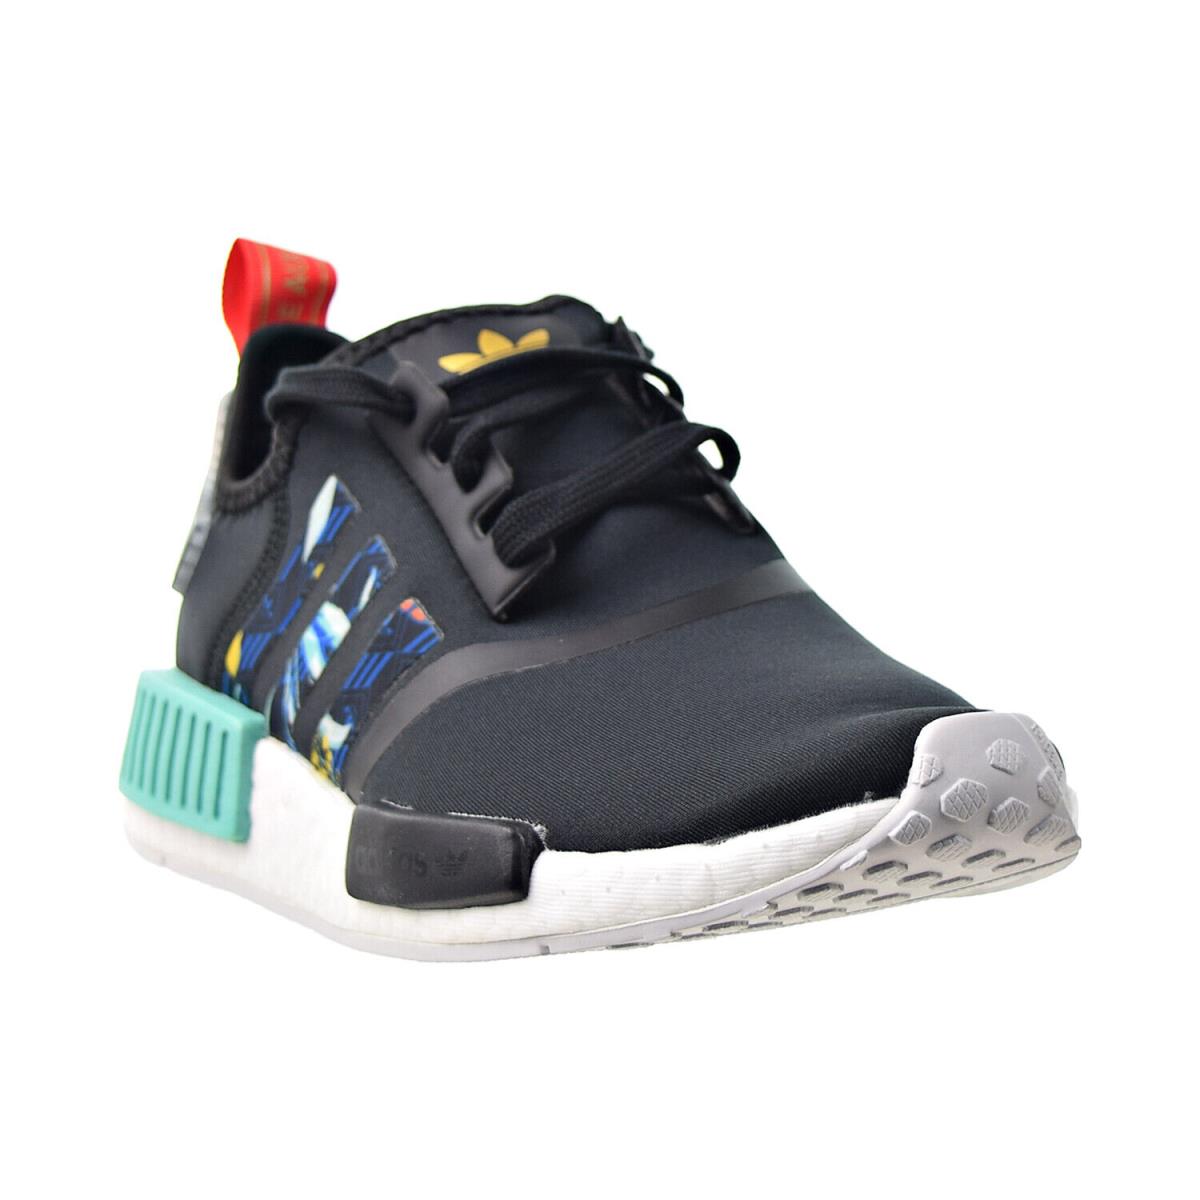 Adidas NMD_R1 Her Studio Women`s Shoes Core Black-supplier Colour-mint FY3665 - Black-Supplier Colour-Acid Mint